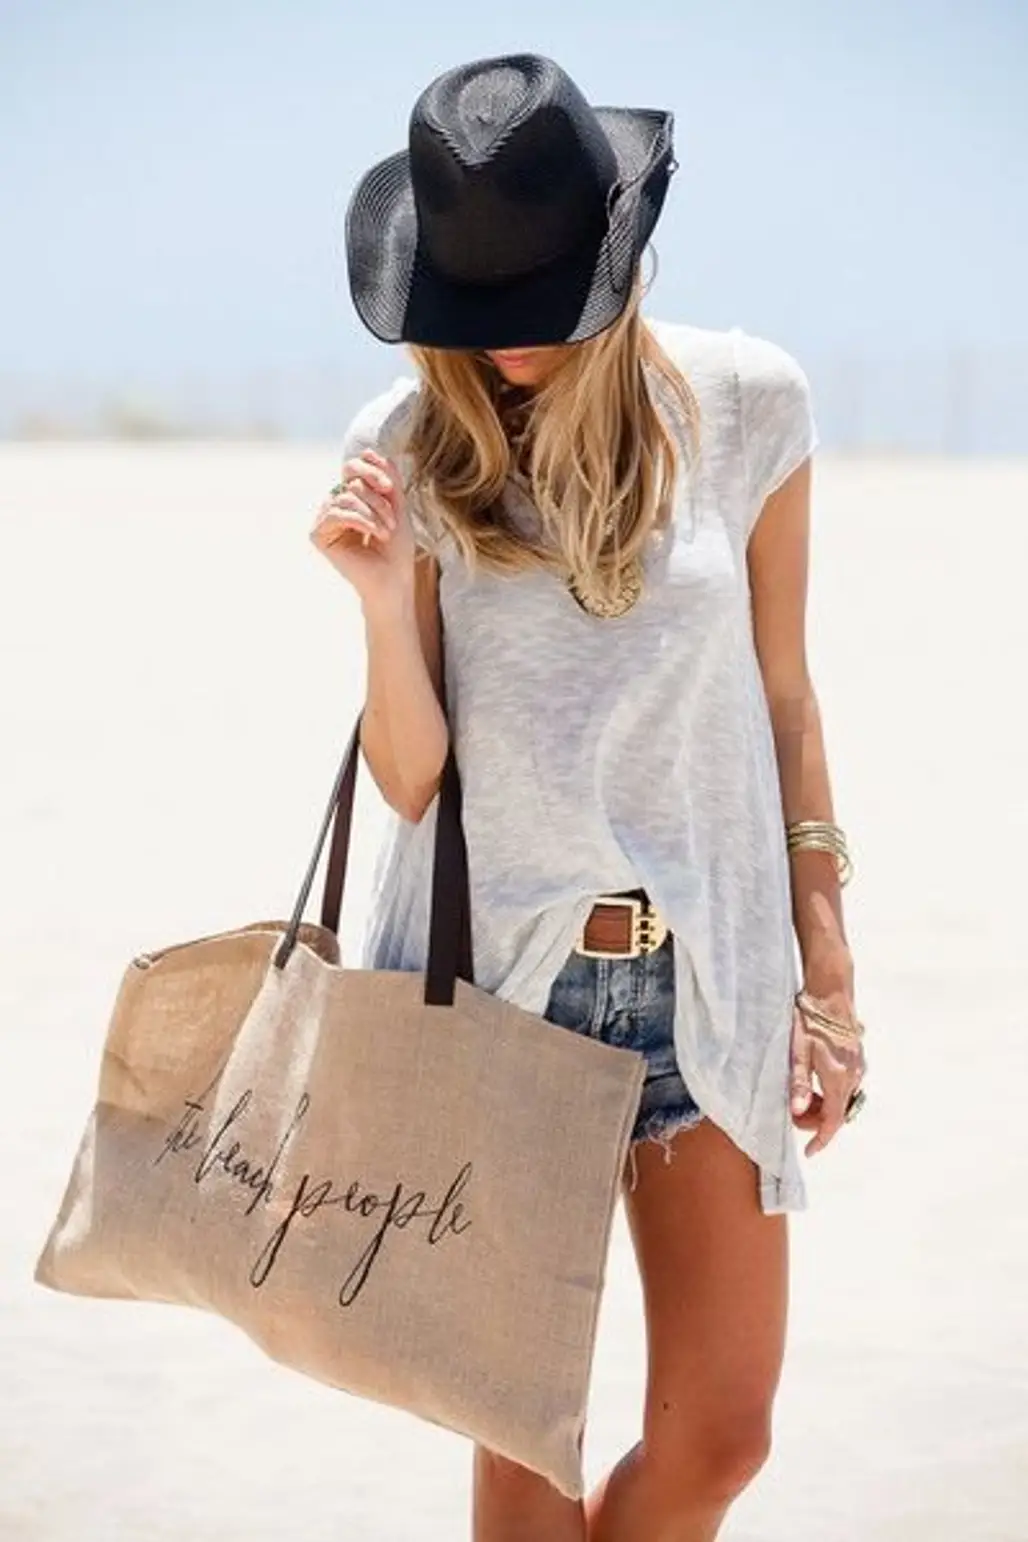 The Beach People Tote